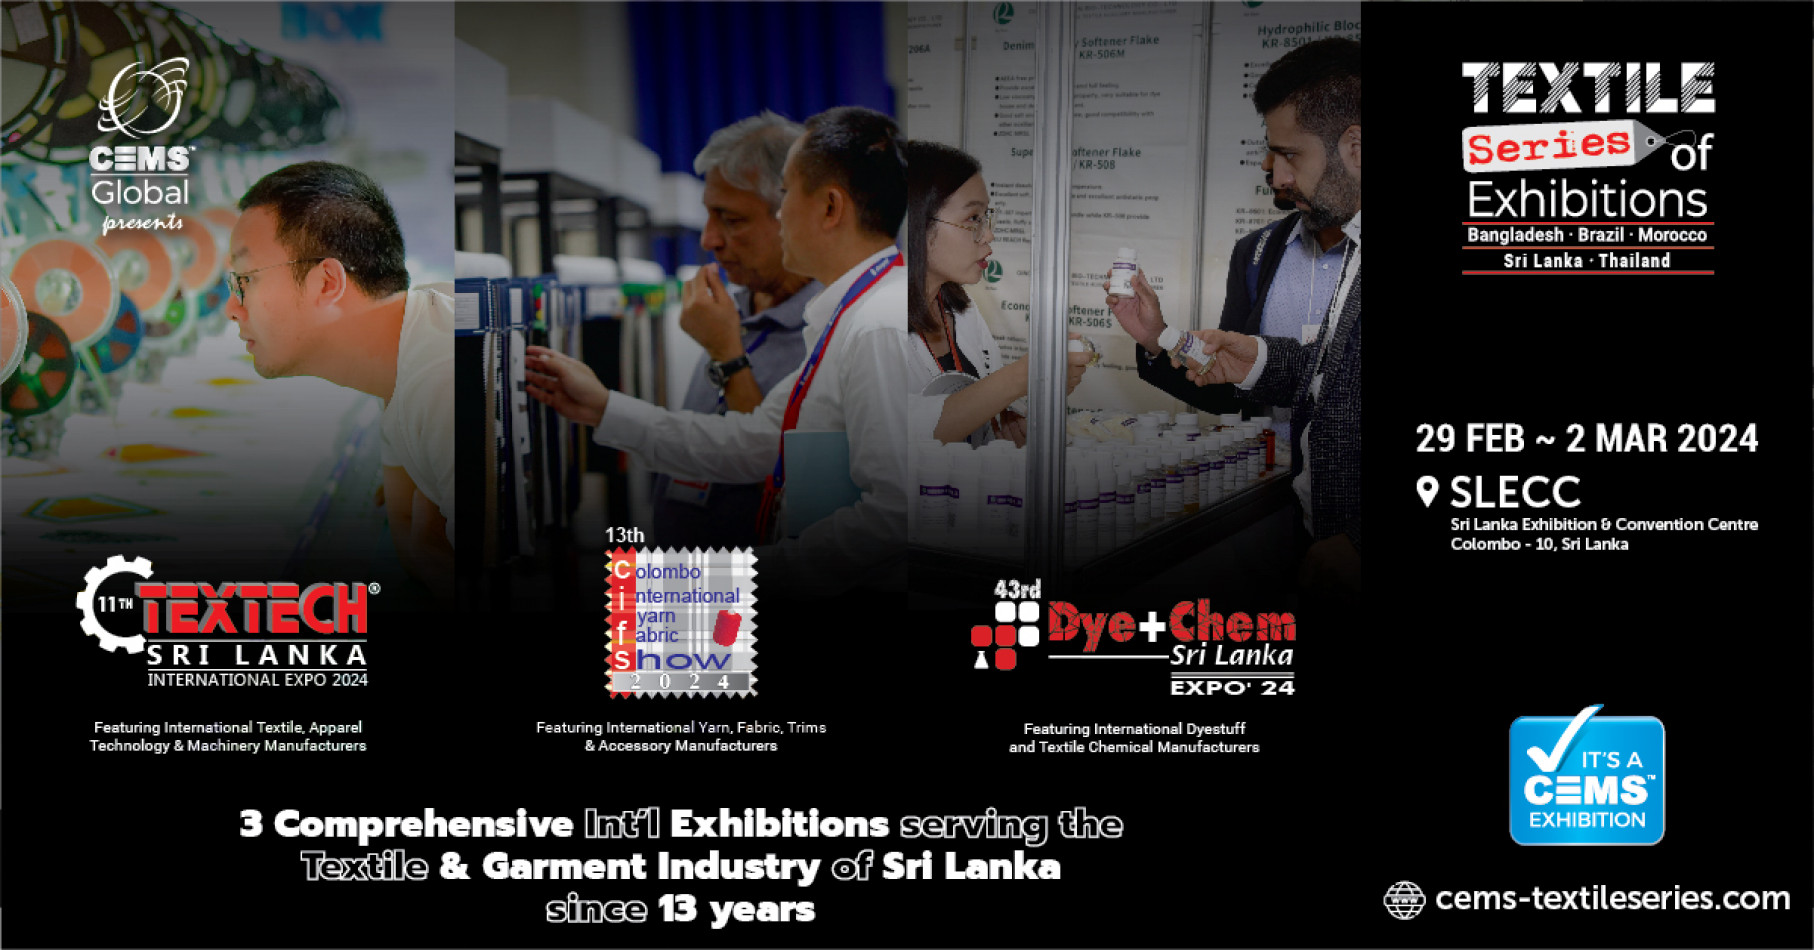 CEMS-Global's Sri Lankan of the Textile Series of Exhibitions from 29 Feb to 2 March 2024